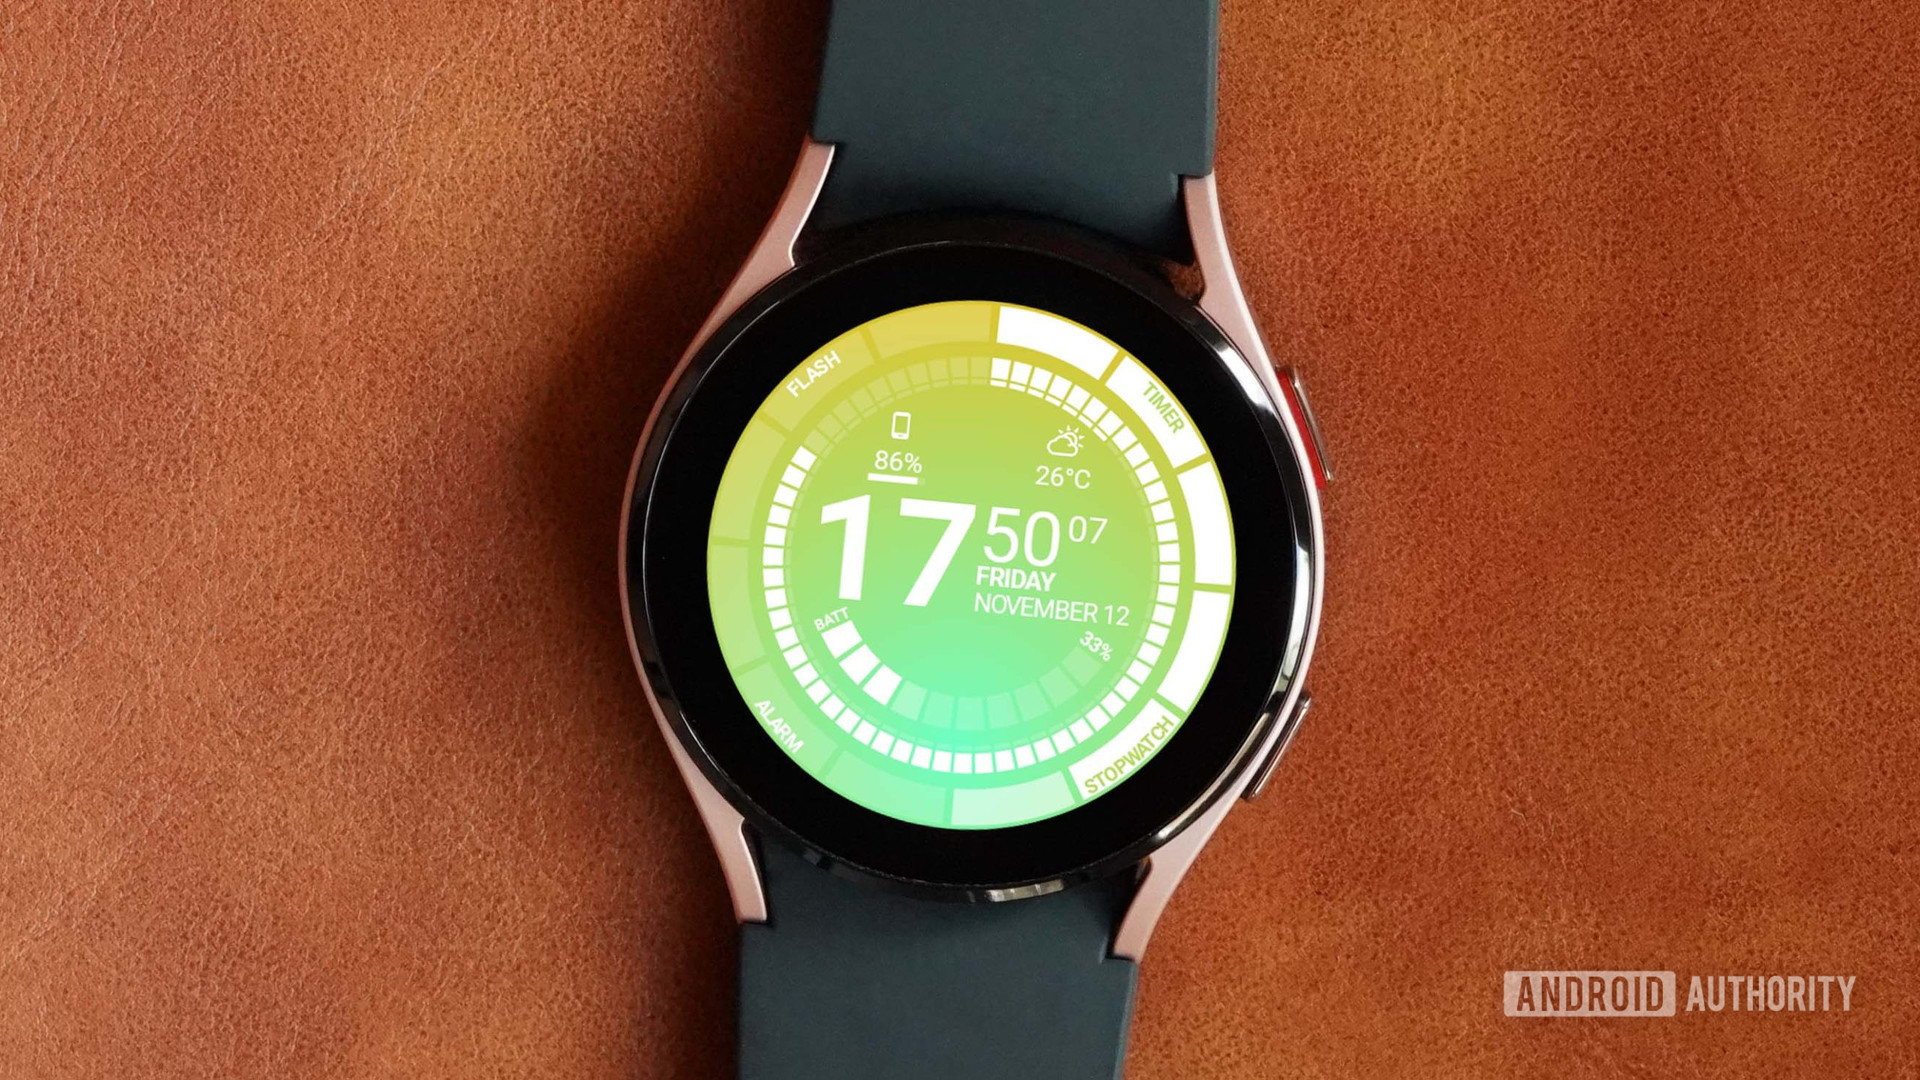 A Samsung Galaxy Watch 4 rests on a leather surface displaying the watch face Venom by Thema.